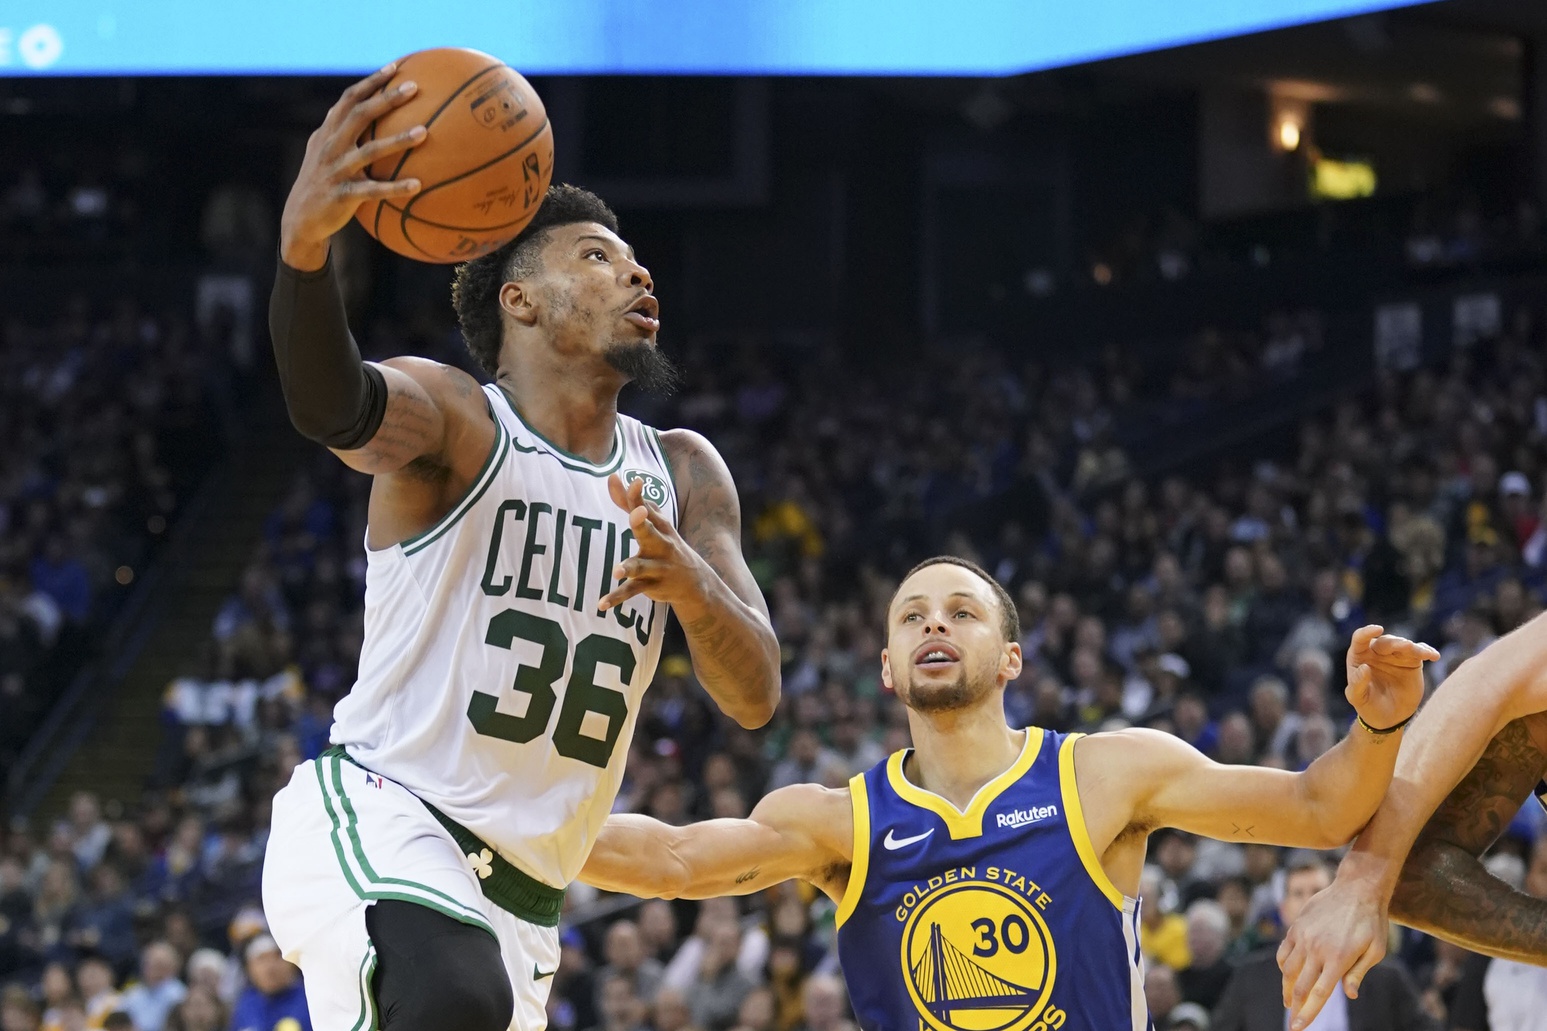 Boston Celtics guard Marcus Smart (36) shoots the basketball against Golden State Warriors guard Stephen Curry (30) during the third quarter at Oracle Arena.